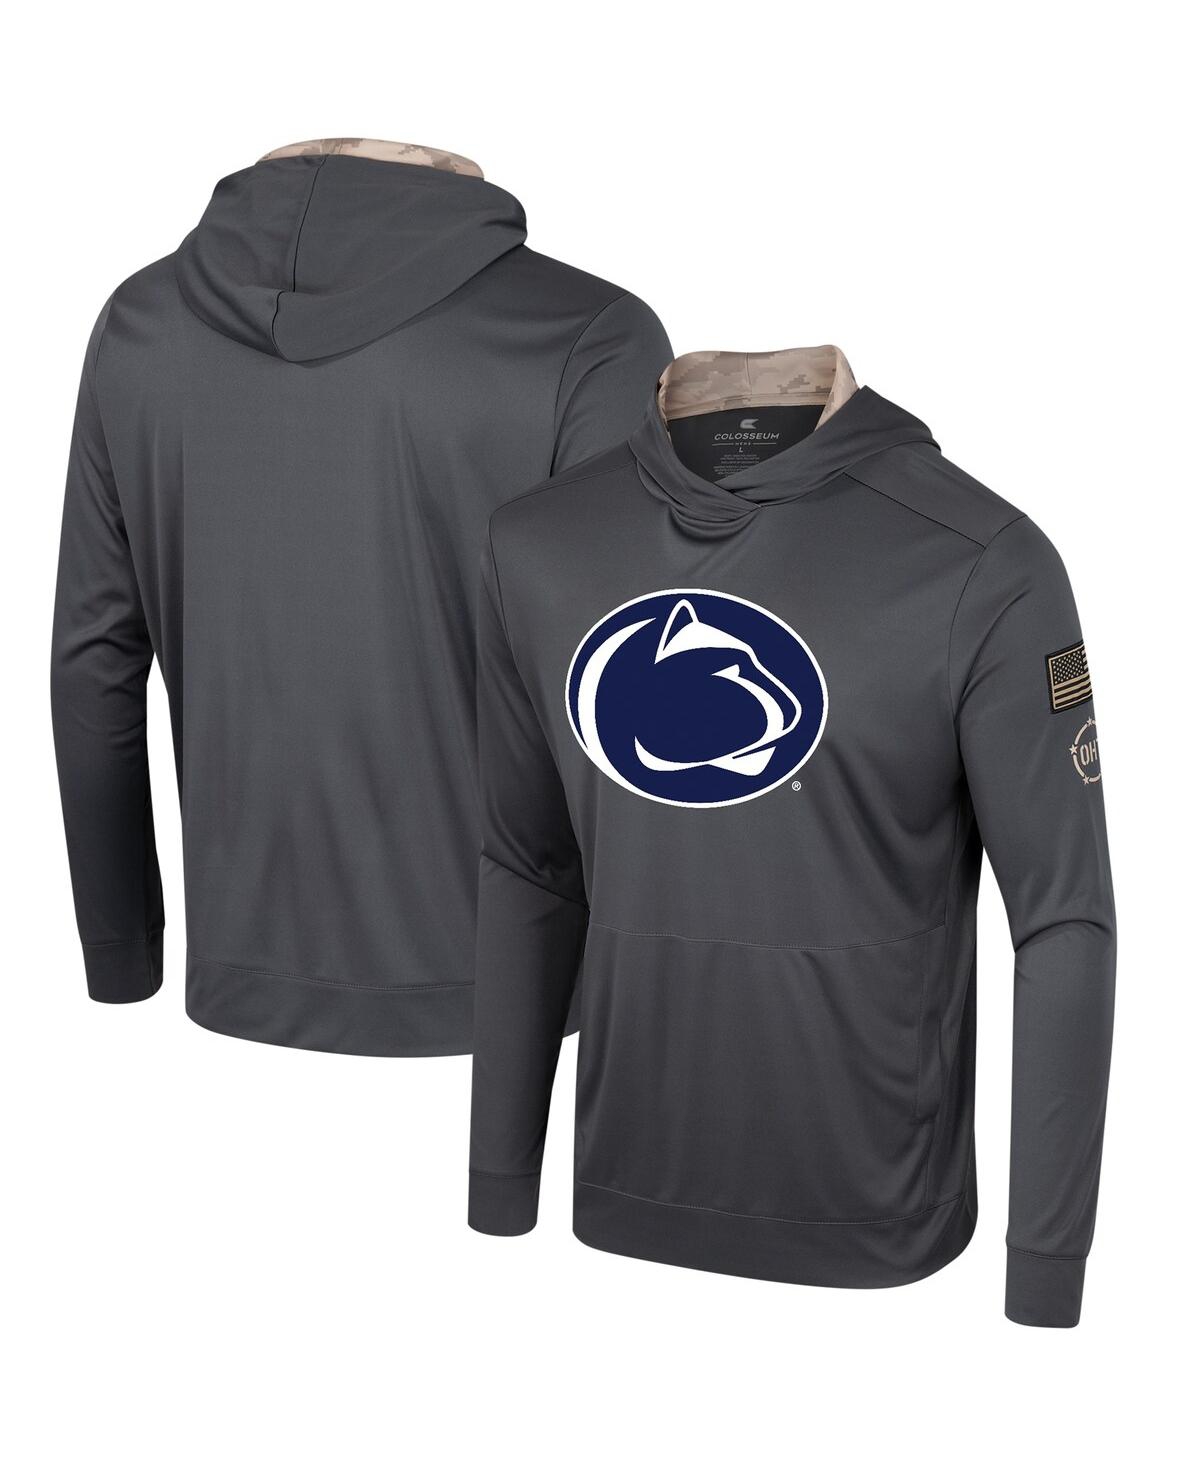 Men's Colosseum Charcoal Penn State Nittany Lions Oht Military-Inspired Appreciation Long Sleeve Hoodie T-shirt - Charcoal